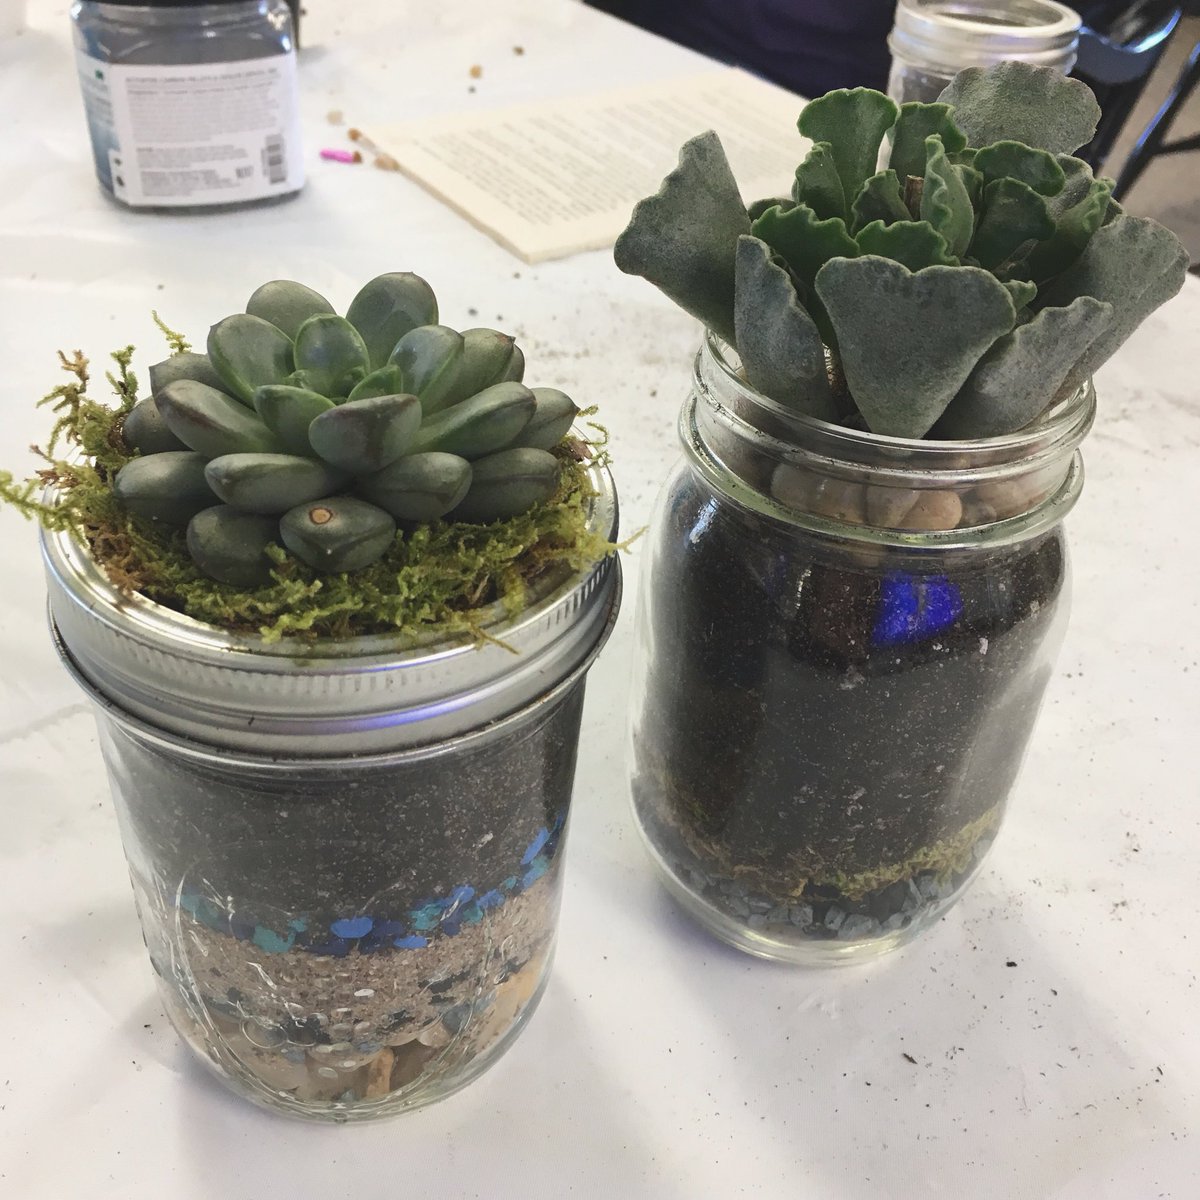 Hosted the cutest terrarium workshop for our teen program this morning. Super easy and relatively cheap! #librarylife #teenprograms